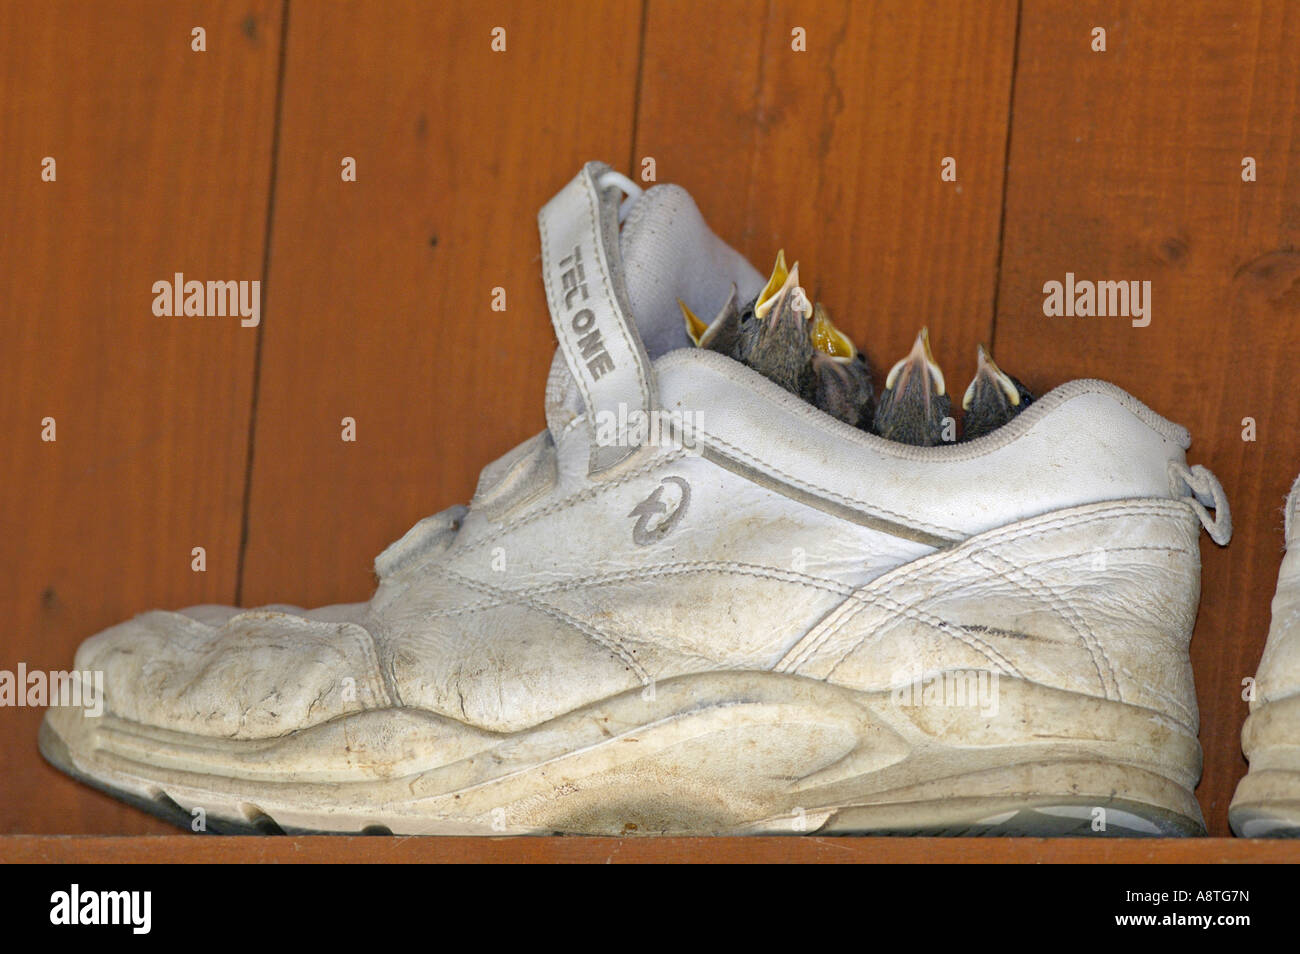 nest in a gym shoe, Germany Stock Photo 